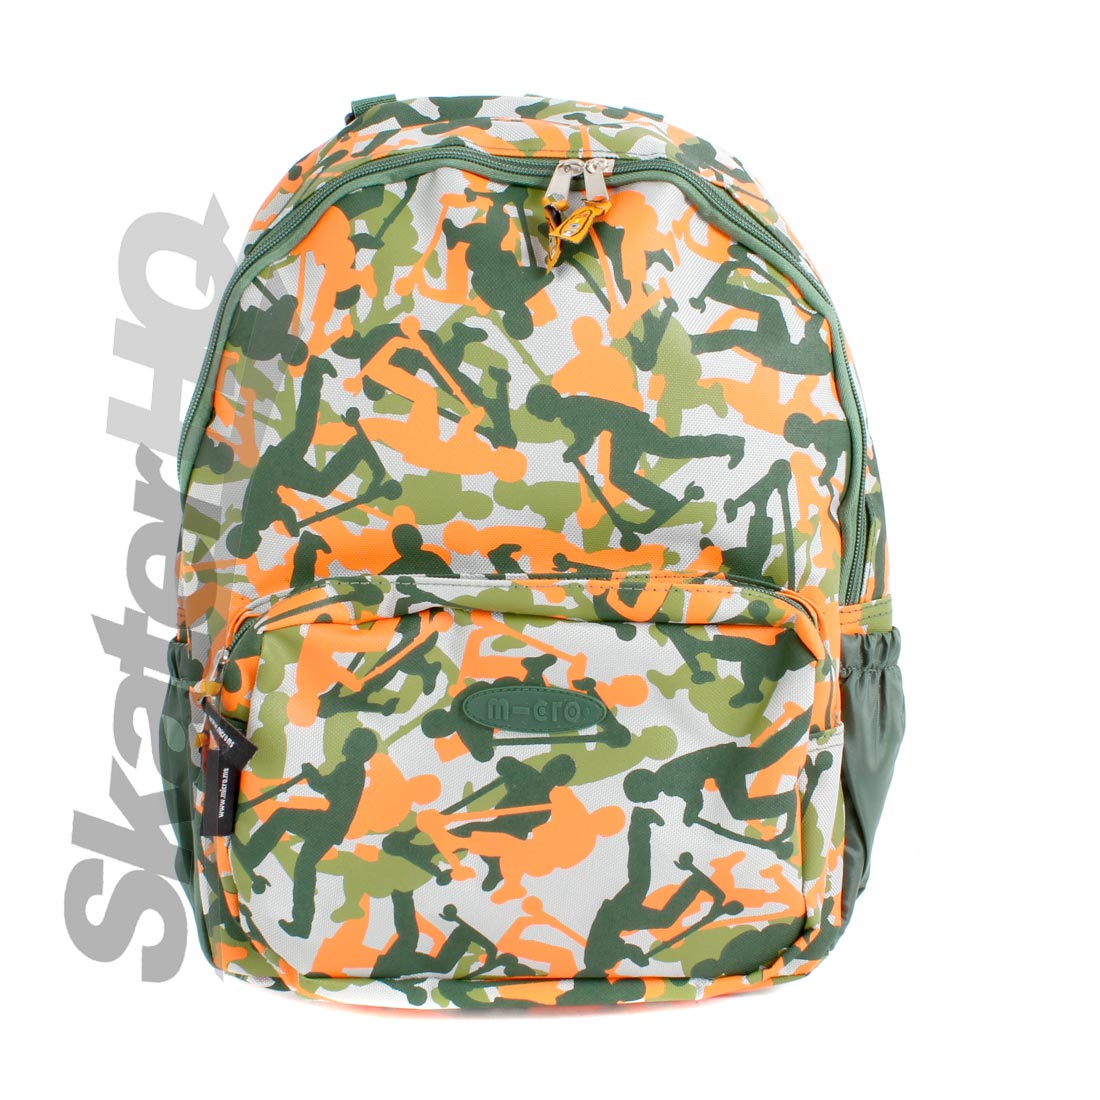 Micro Maxi Backpack - Camo Bags and Backpacks